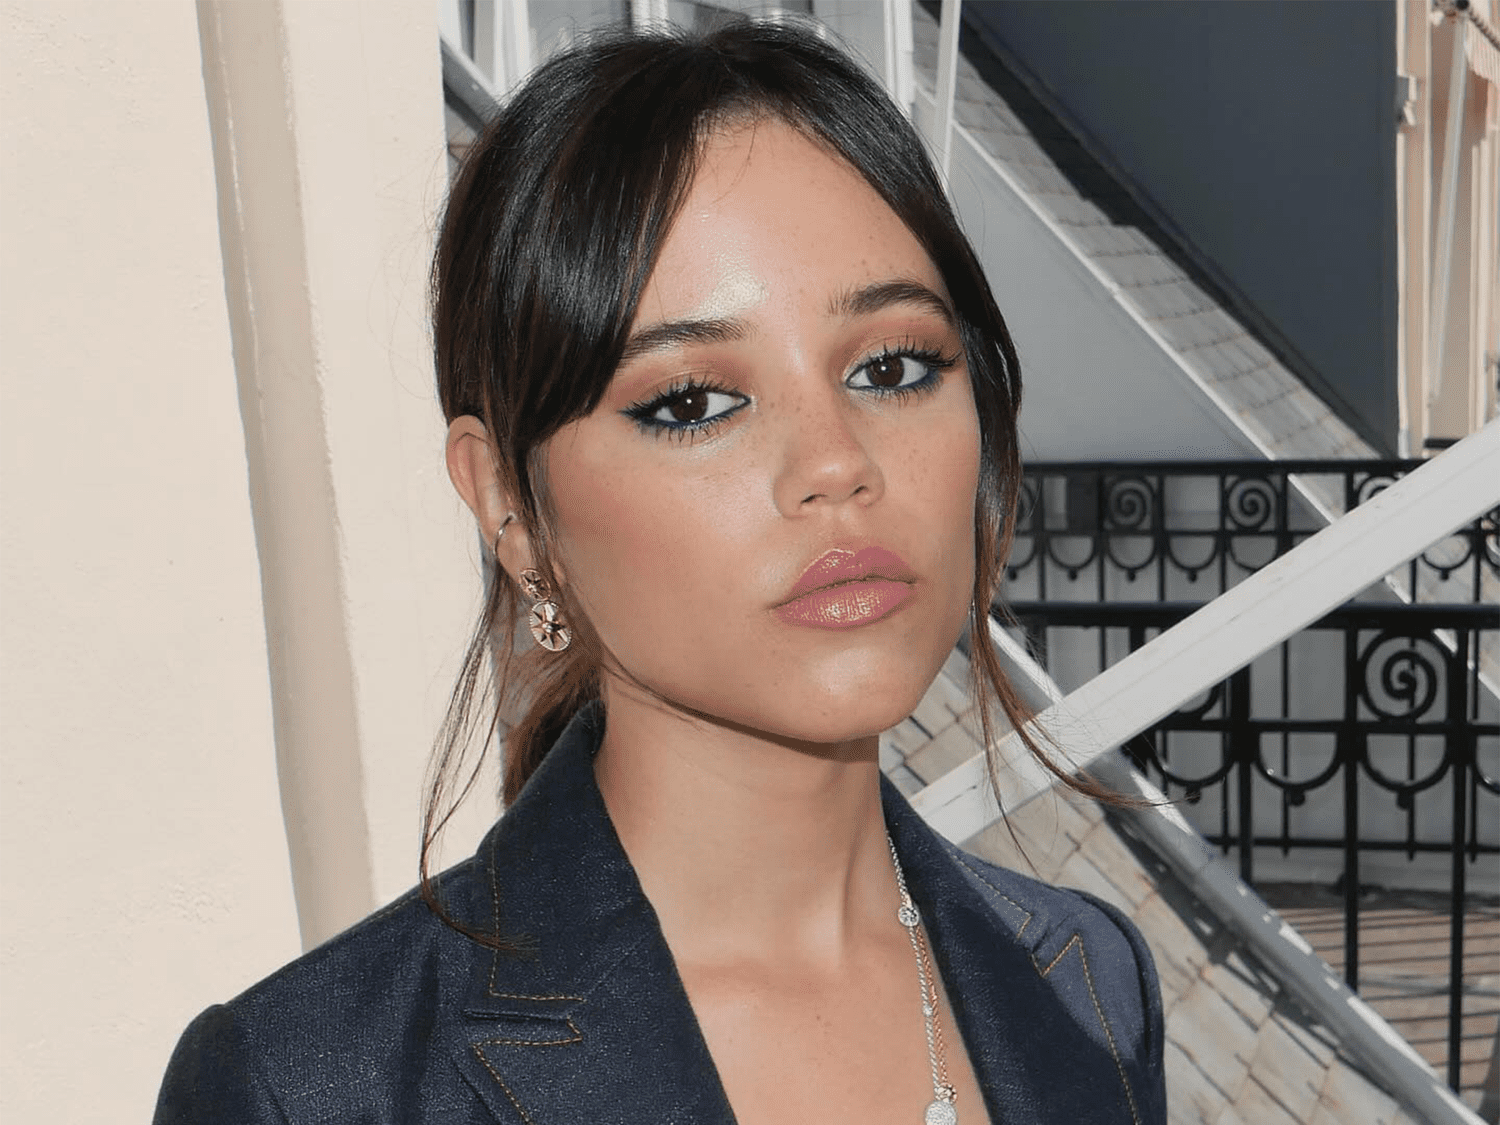 charlene calleja recommends naked pictures of jenna ortega pic